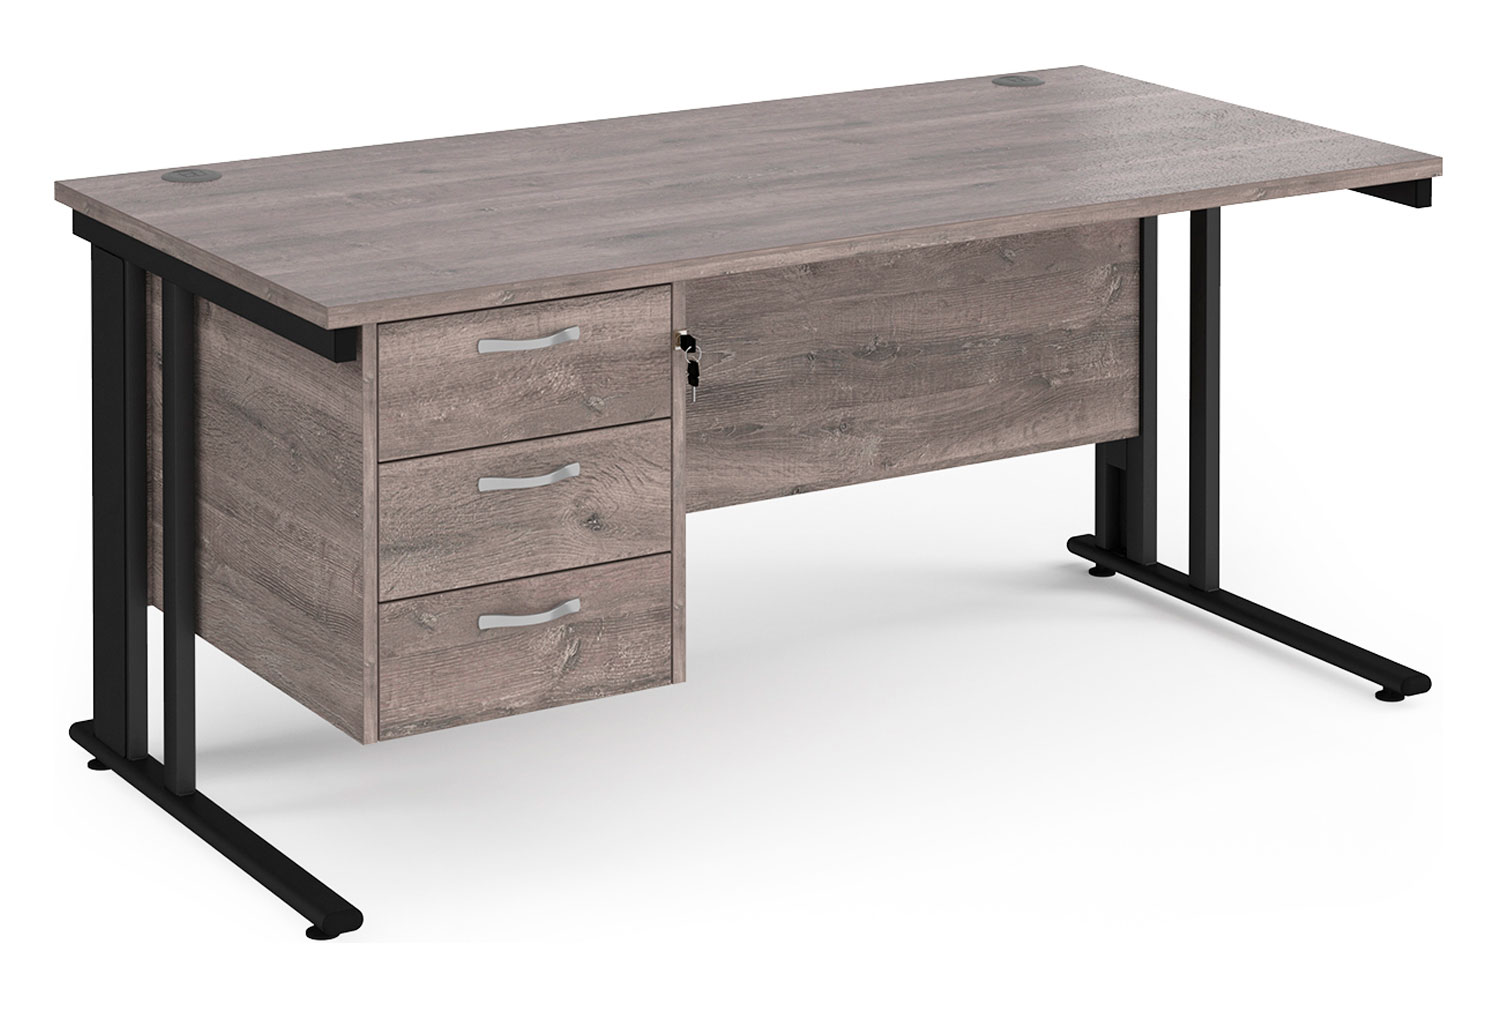 Value Line Deluxe Cable Managed Rectangular Office Desk 3 Drawers (Black Legs), 160wx80dx73h (cm), Grey Oak, Express Delivery